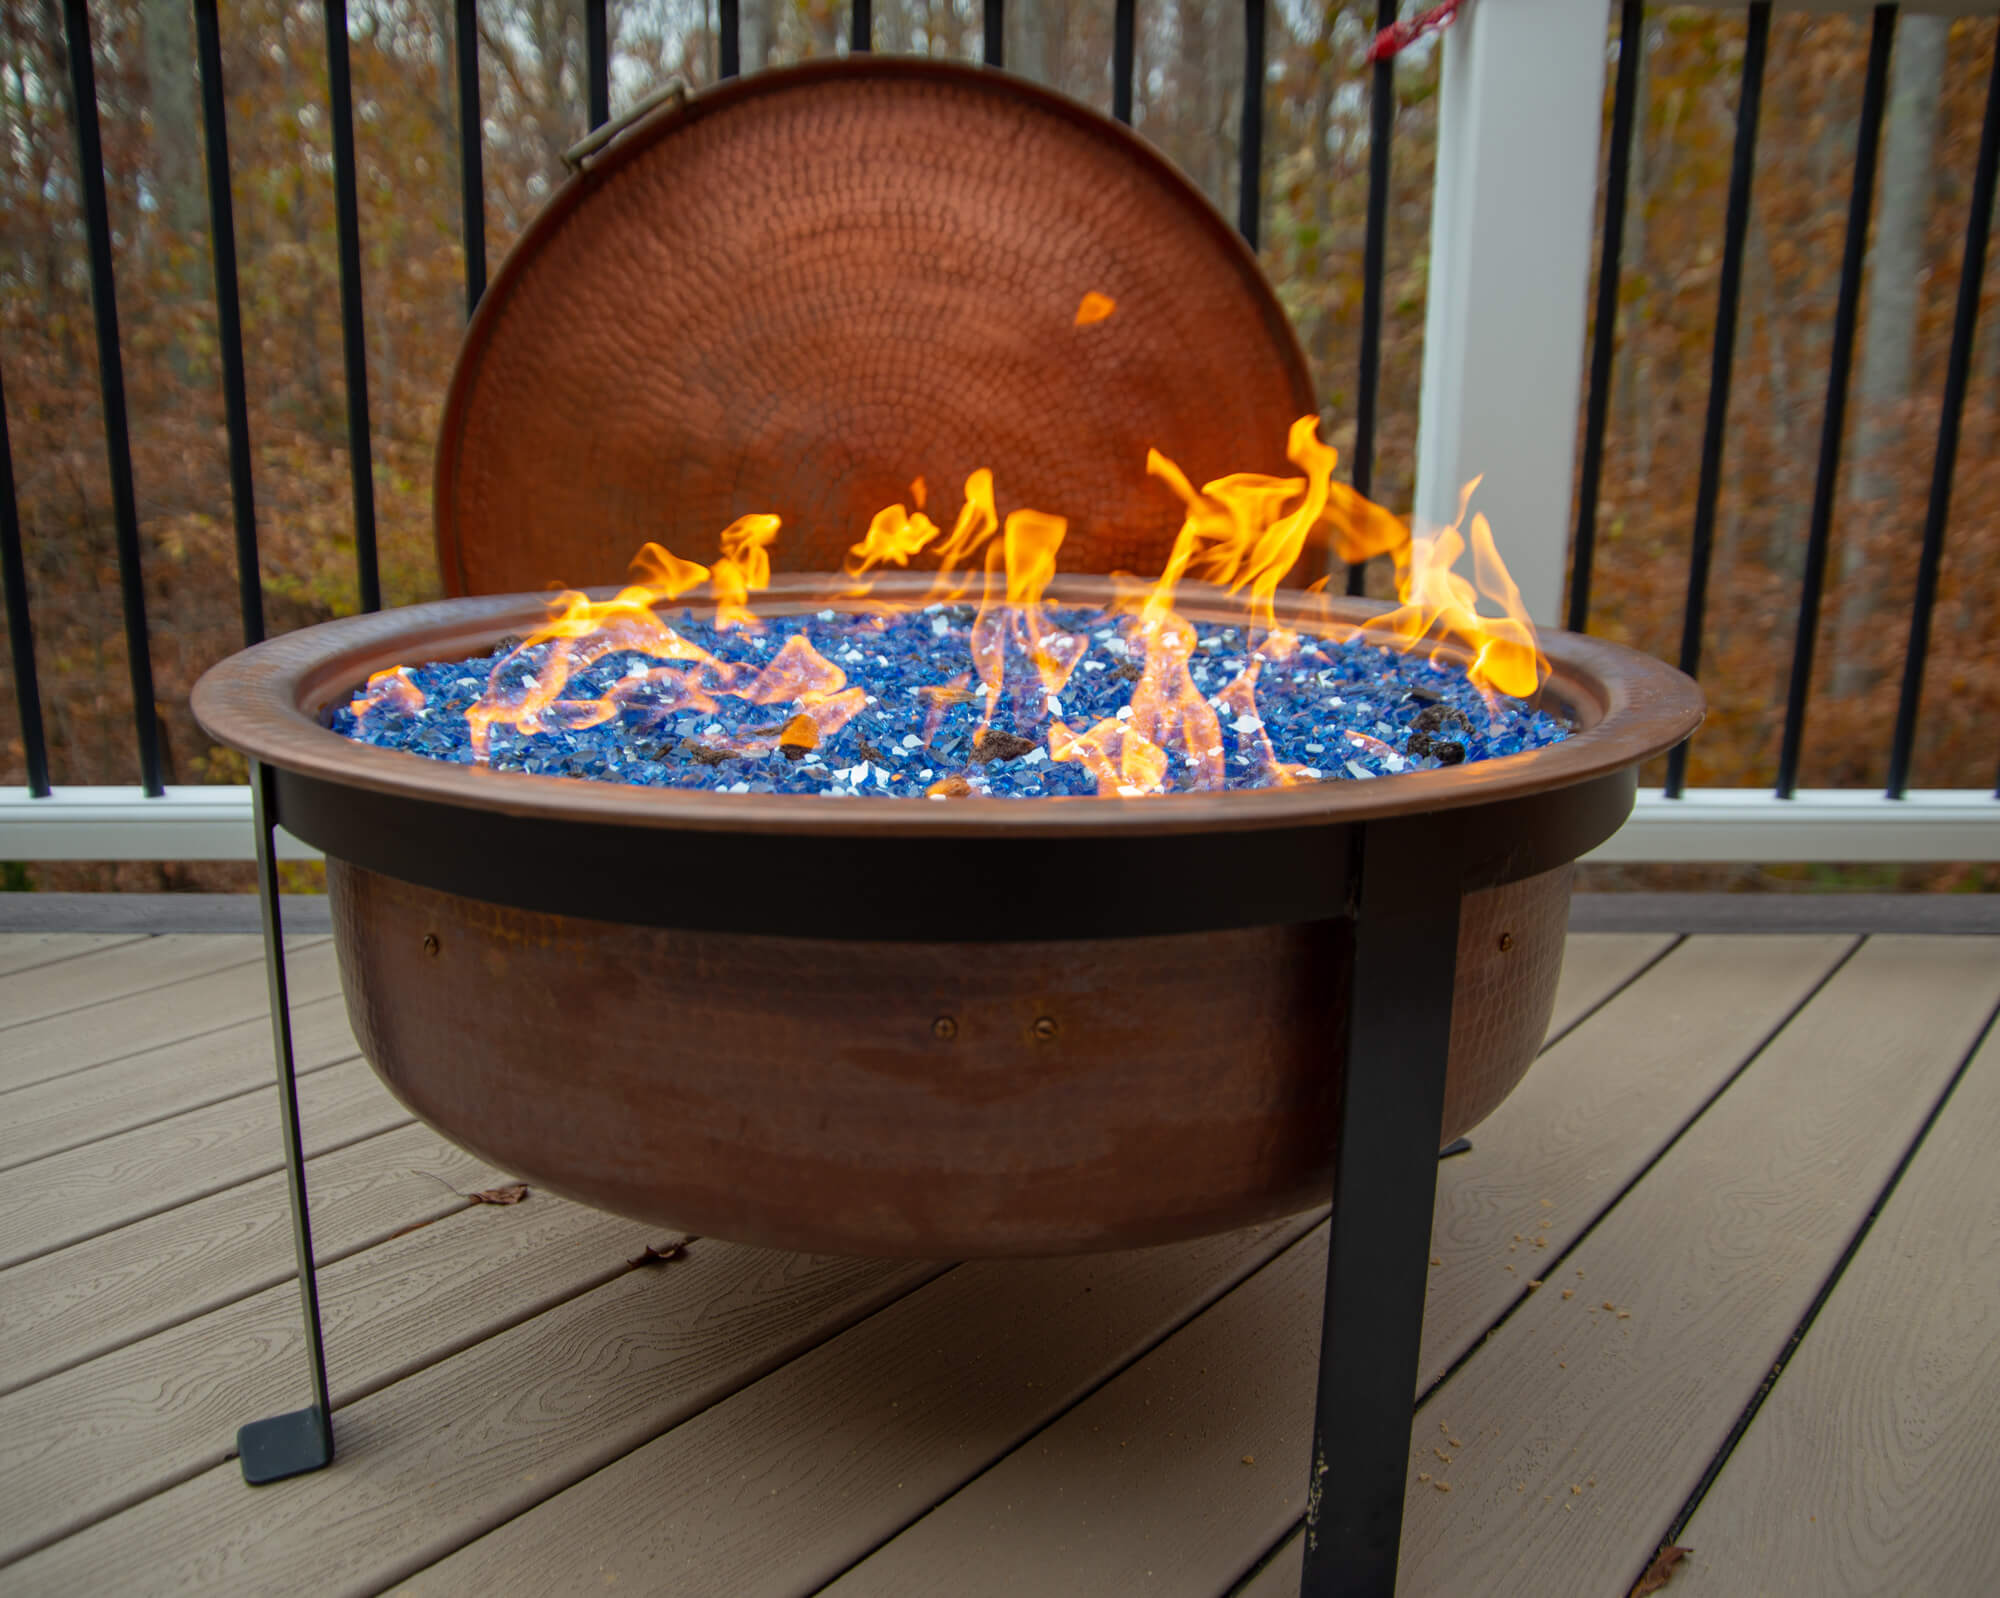 6 Ways To Put A Fire Pit On Wooden Deck, Is It Safe To Use A Propane Fire Pit On Deck